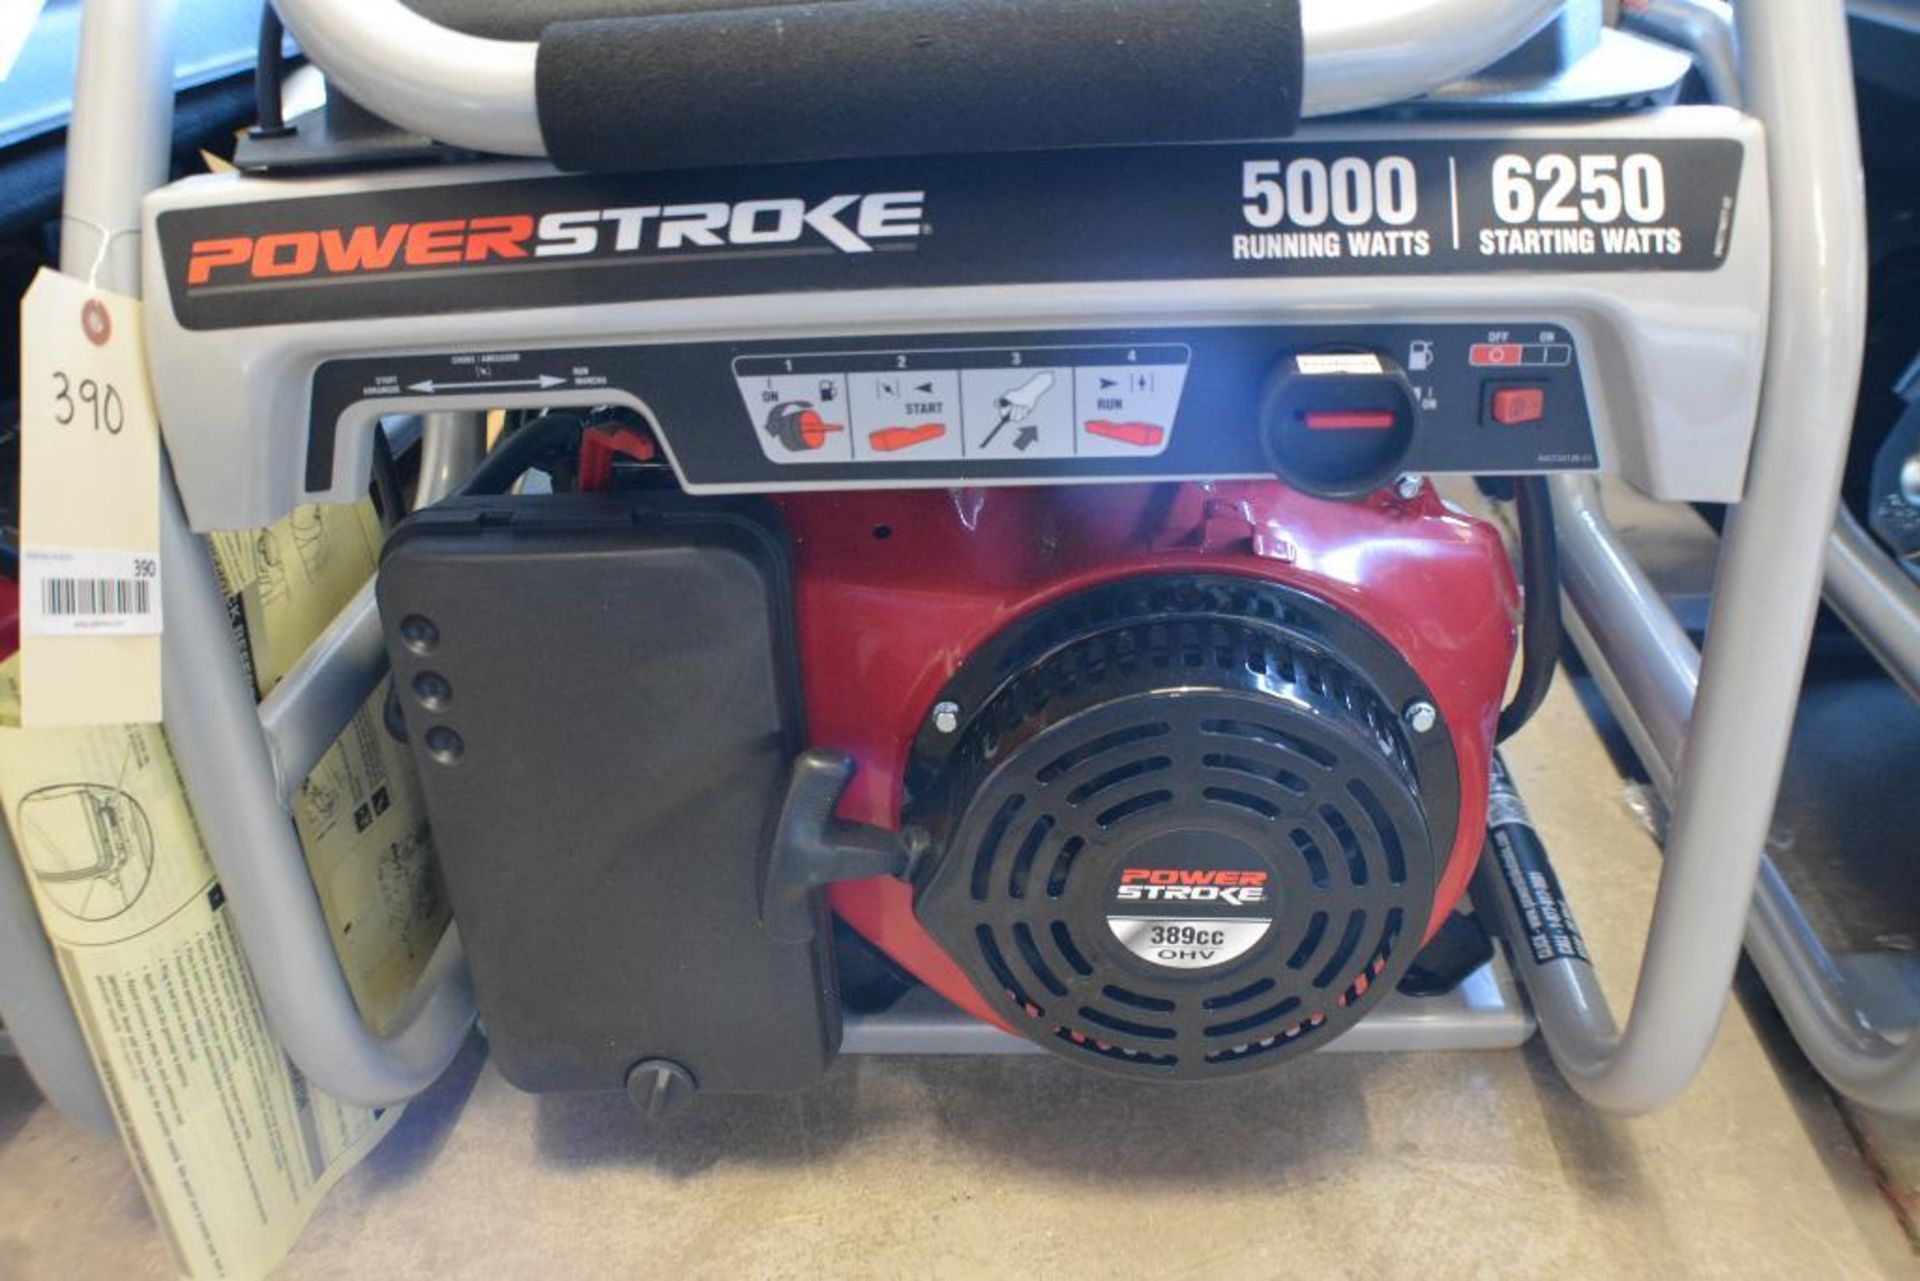 6250 Watts Gasoline Generator 389cc OHV Engine 4 Cycle 120/240V by Power Stroke - Image 2 of 4